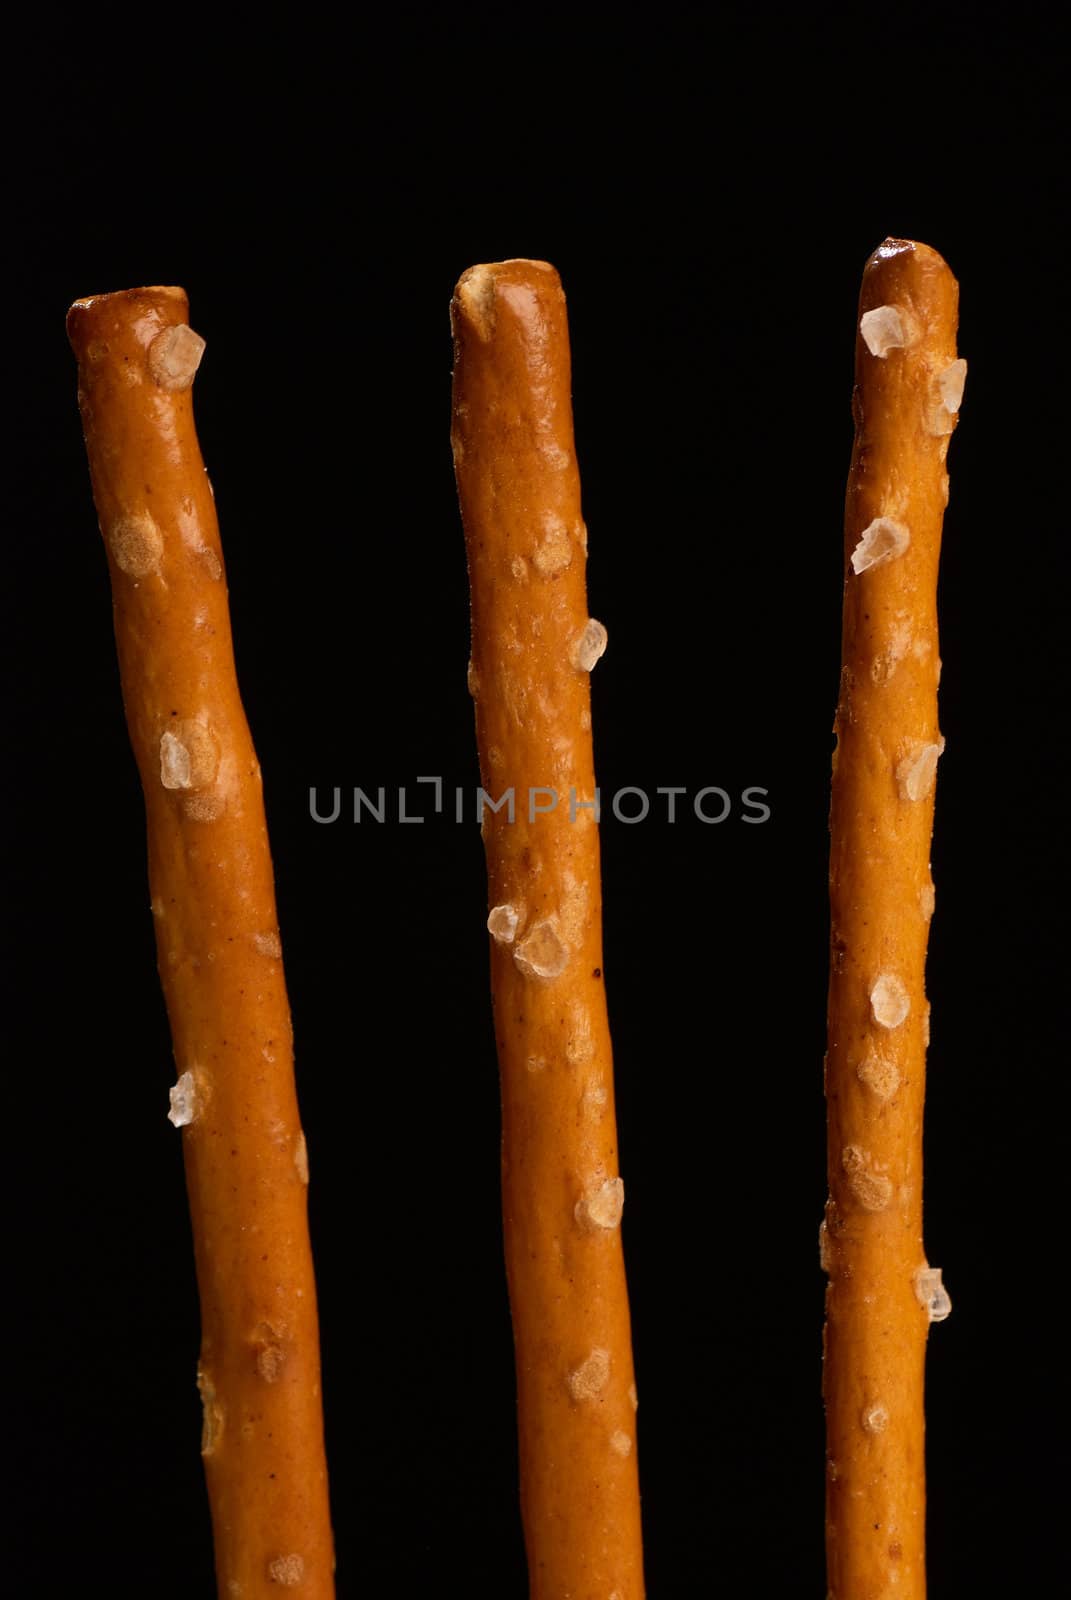 Crunchy salted sticks in vertical take, classic snack